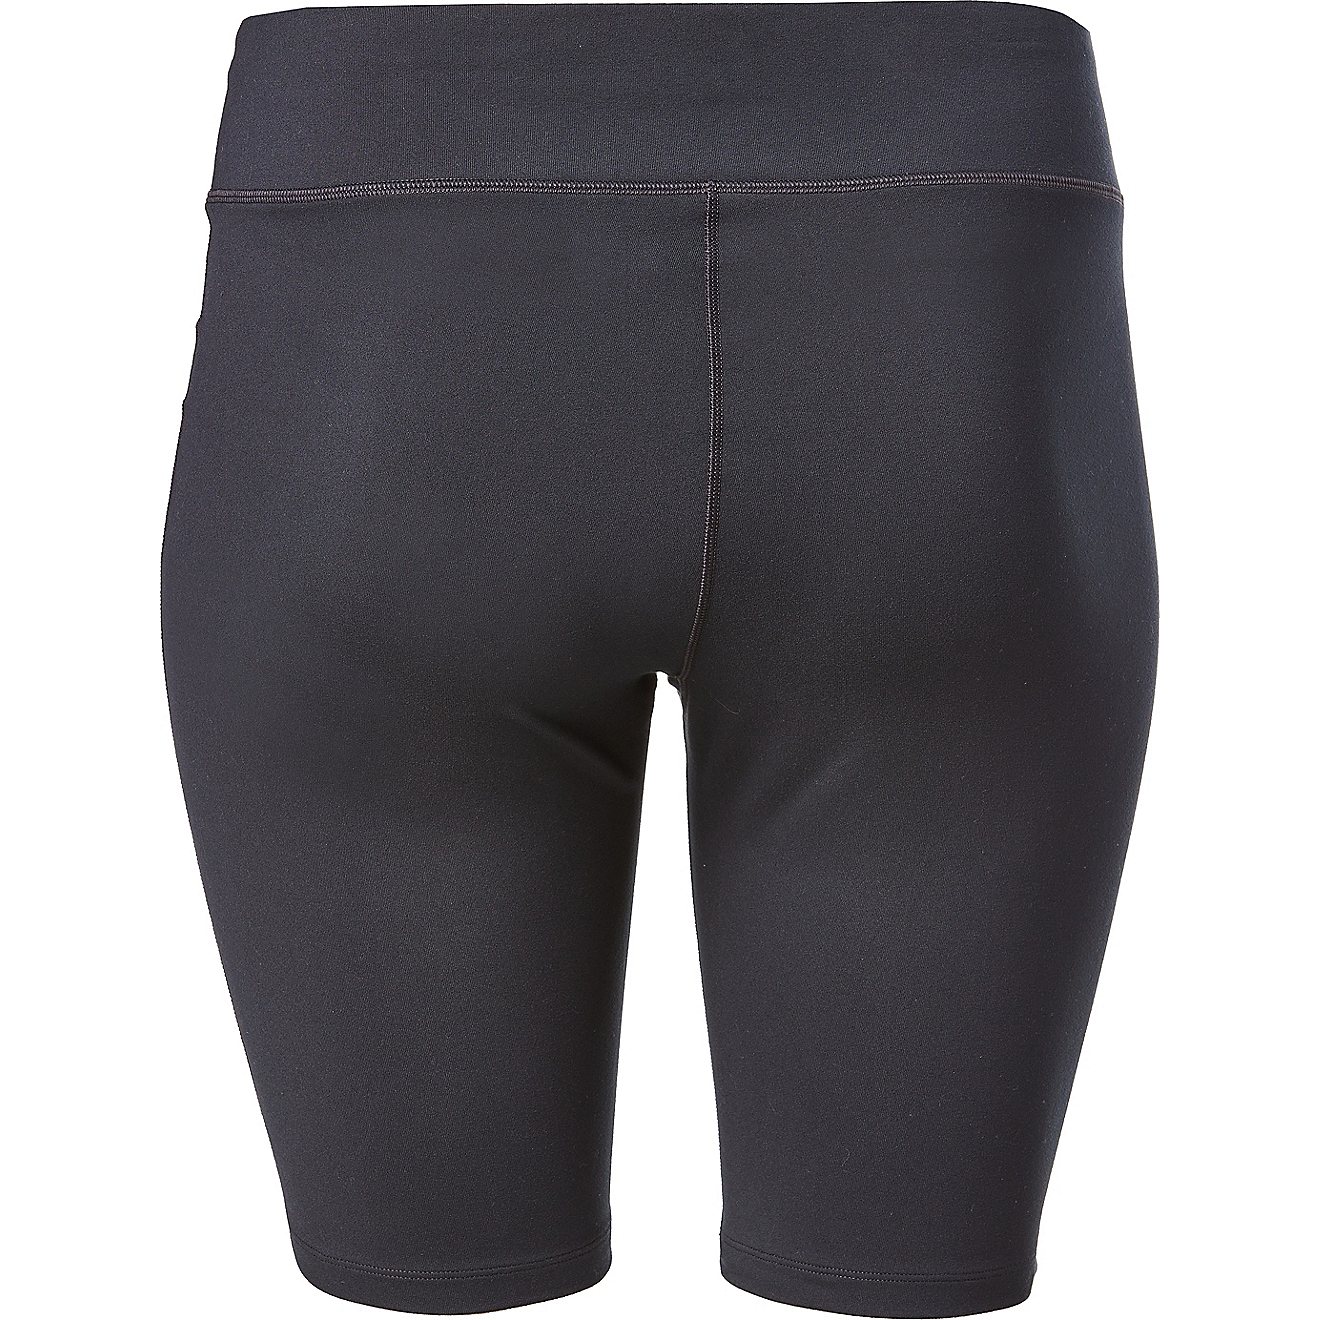 BCG Women's Plus Size Bike Shorts | Free Shipping at Academy